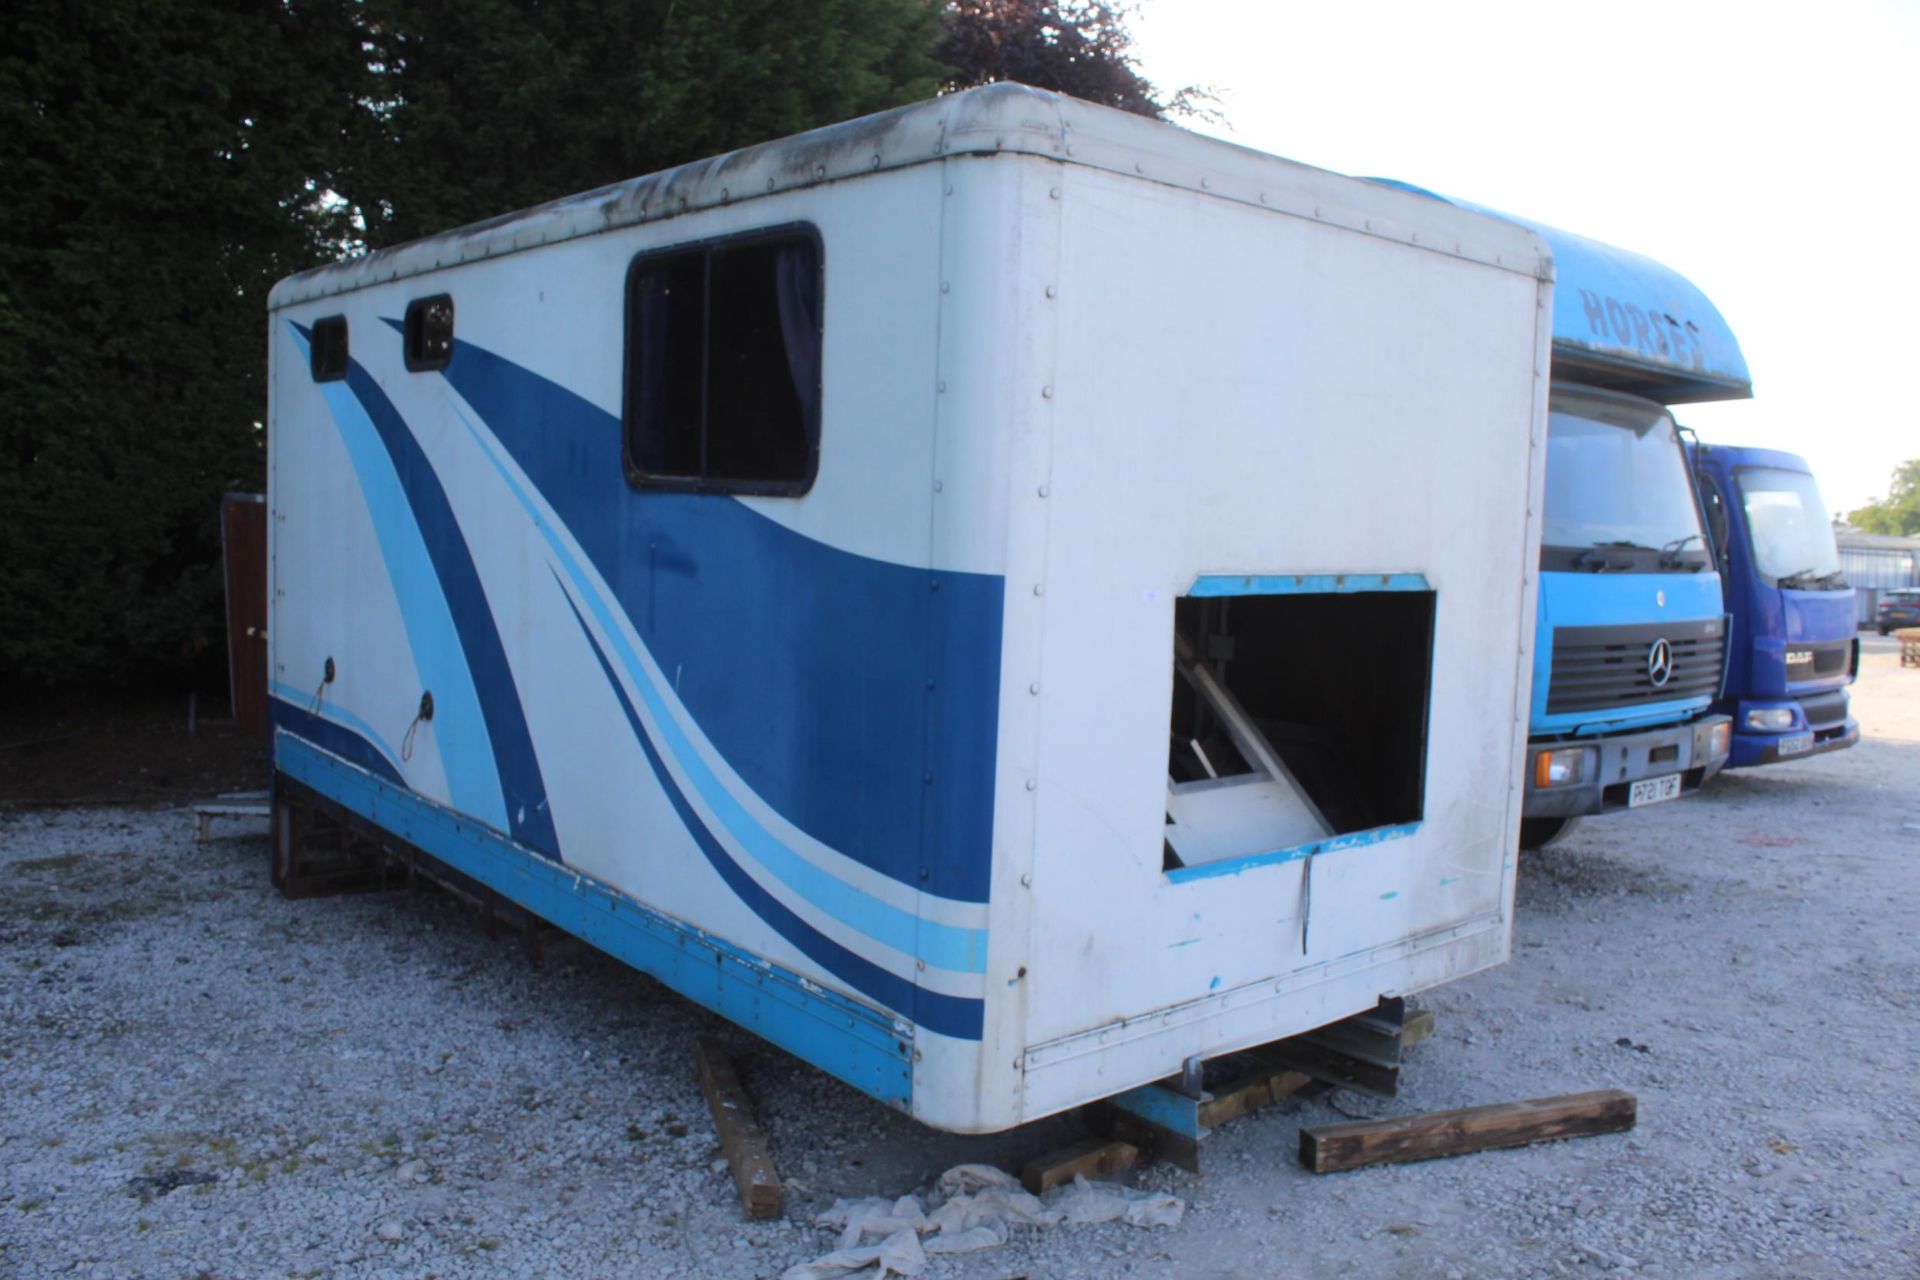 A 17FT HORSE BOX BODY WITH THREE STALLS AND A FRONT SECTION FOR TACK ETC NO VAT